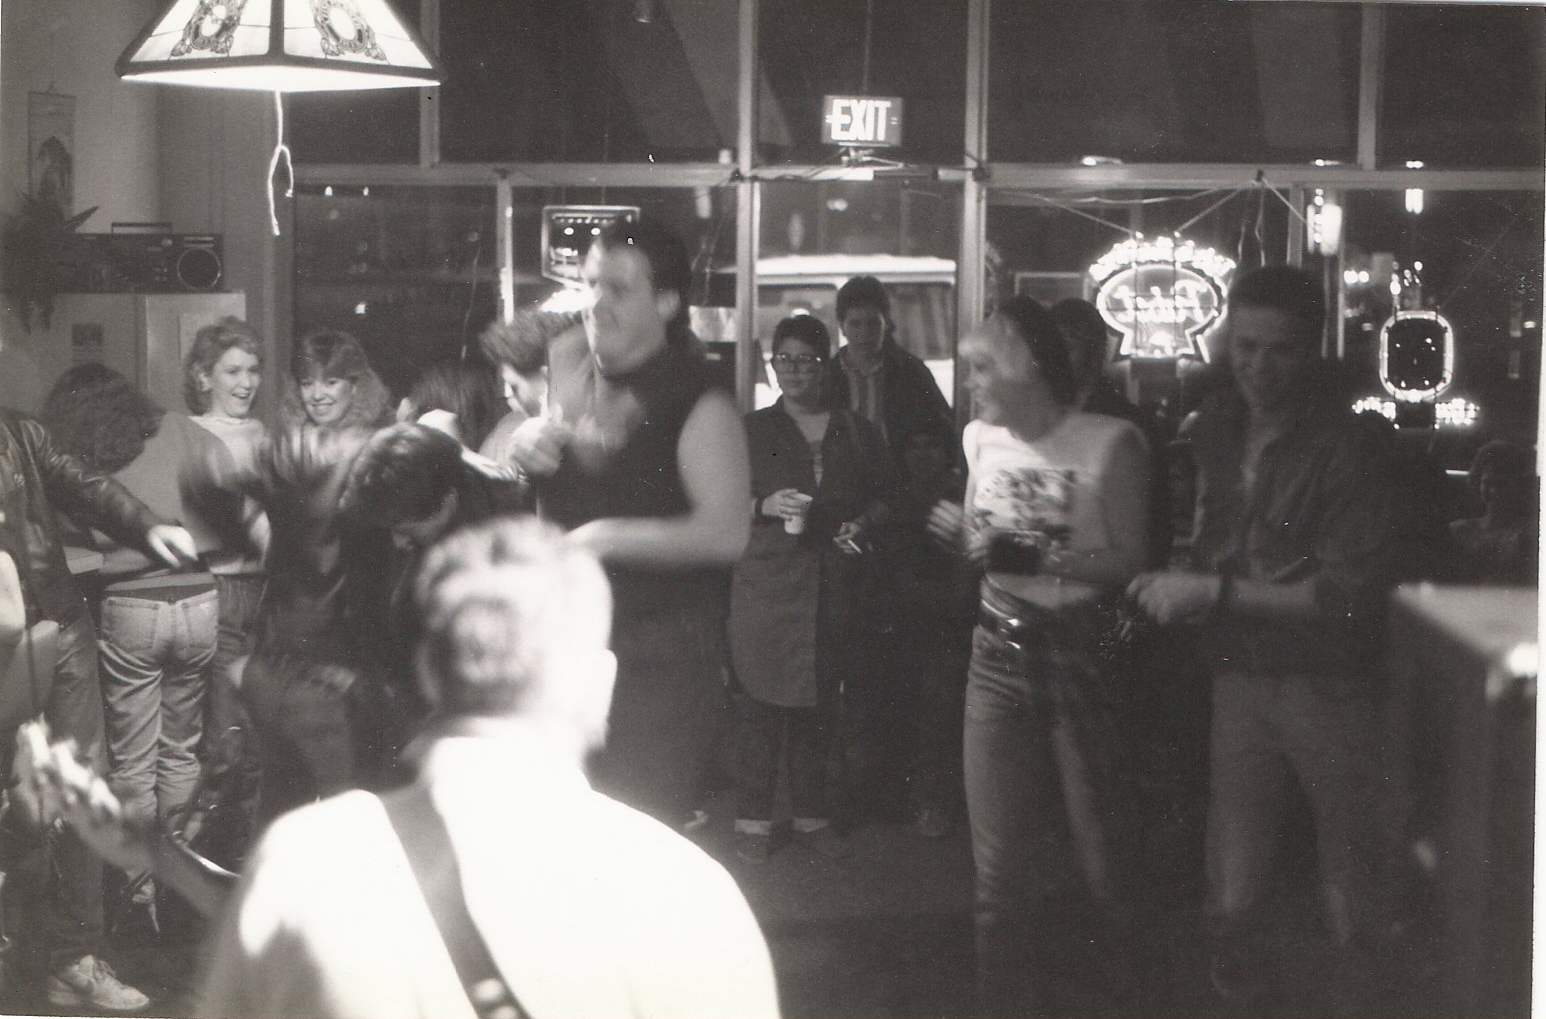 Crowd at Dale's, Chattanooga, TN 1984